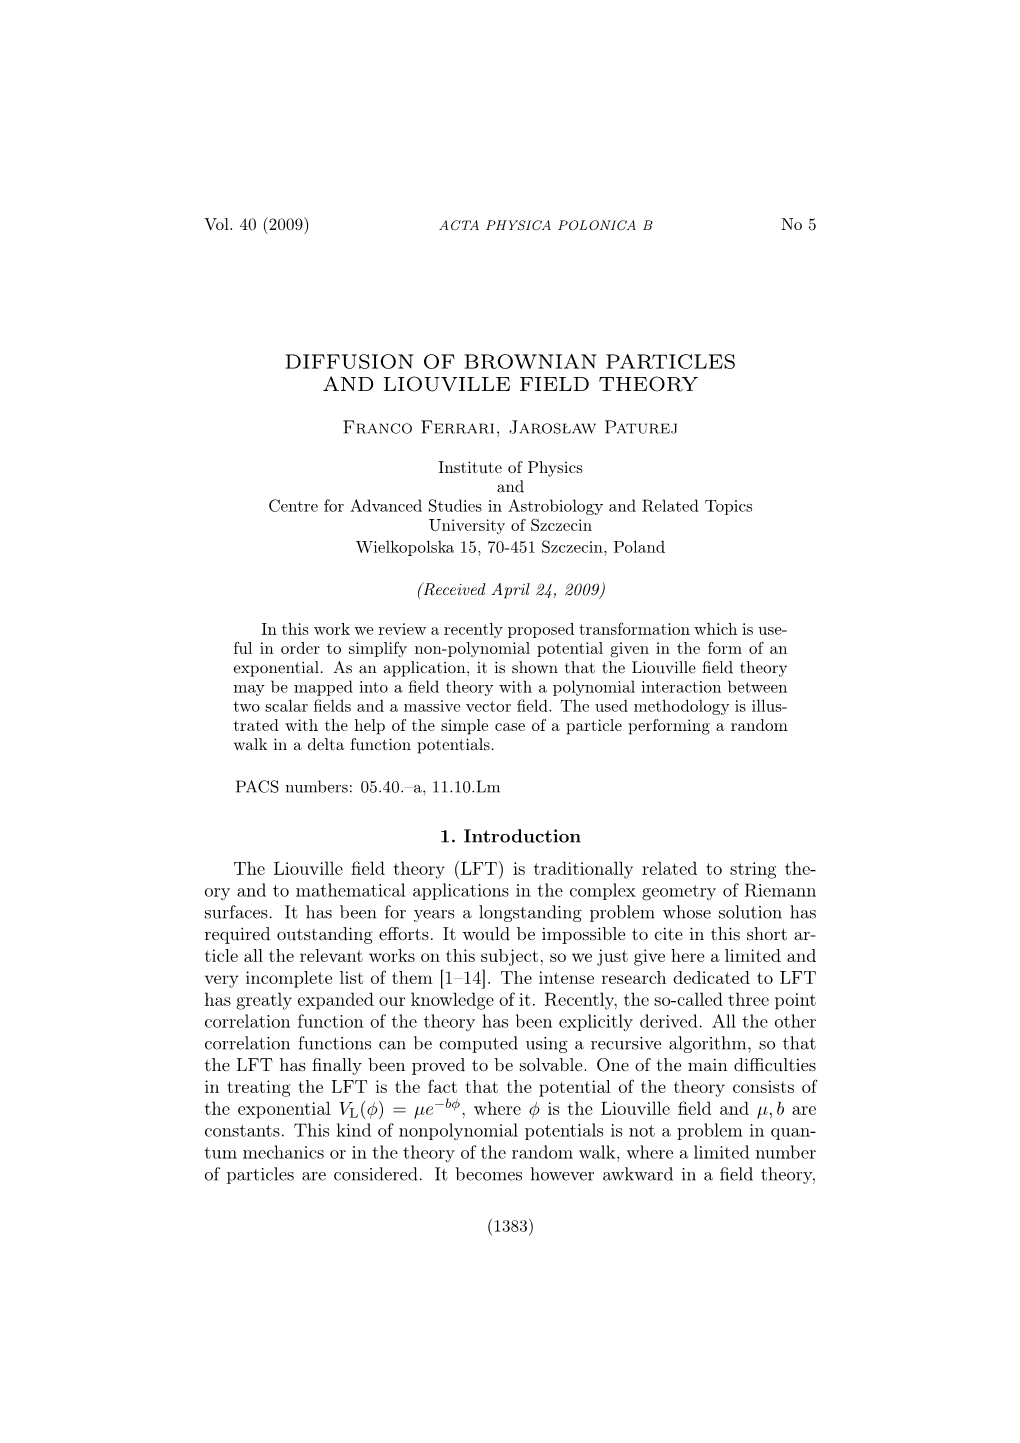 Diffusion of Brownian Particles and Liouville Field Theory